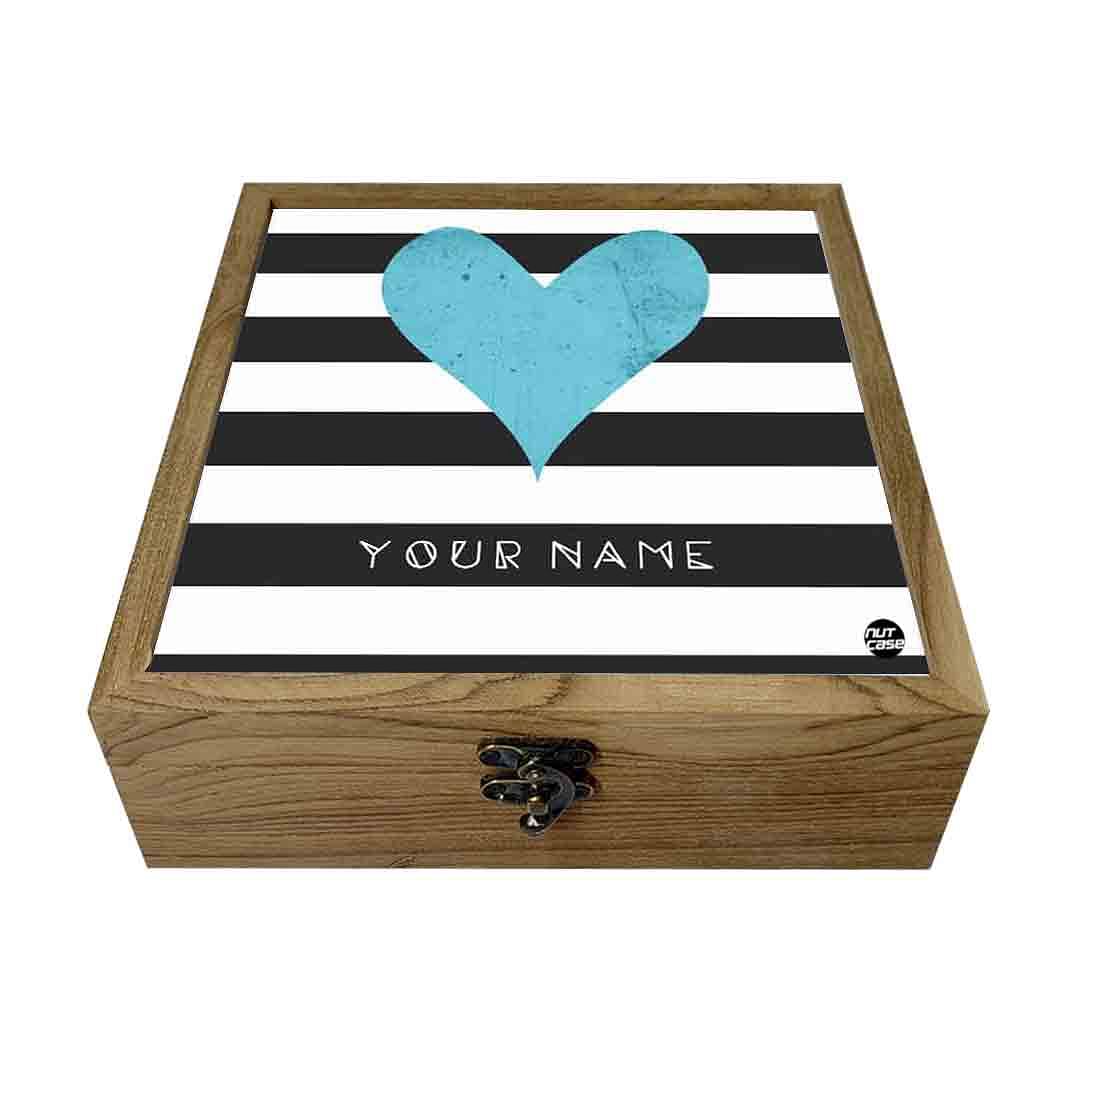 Personalized Baby Gifts | Best Gifts Personalized for Baby